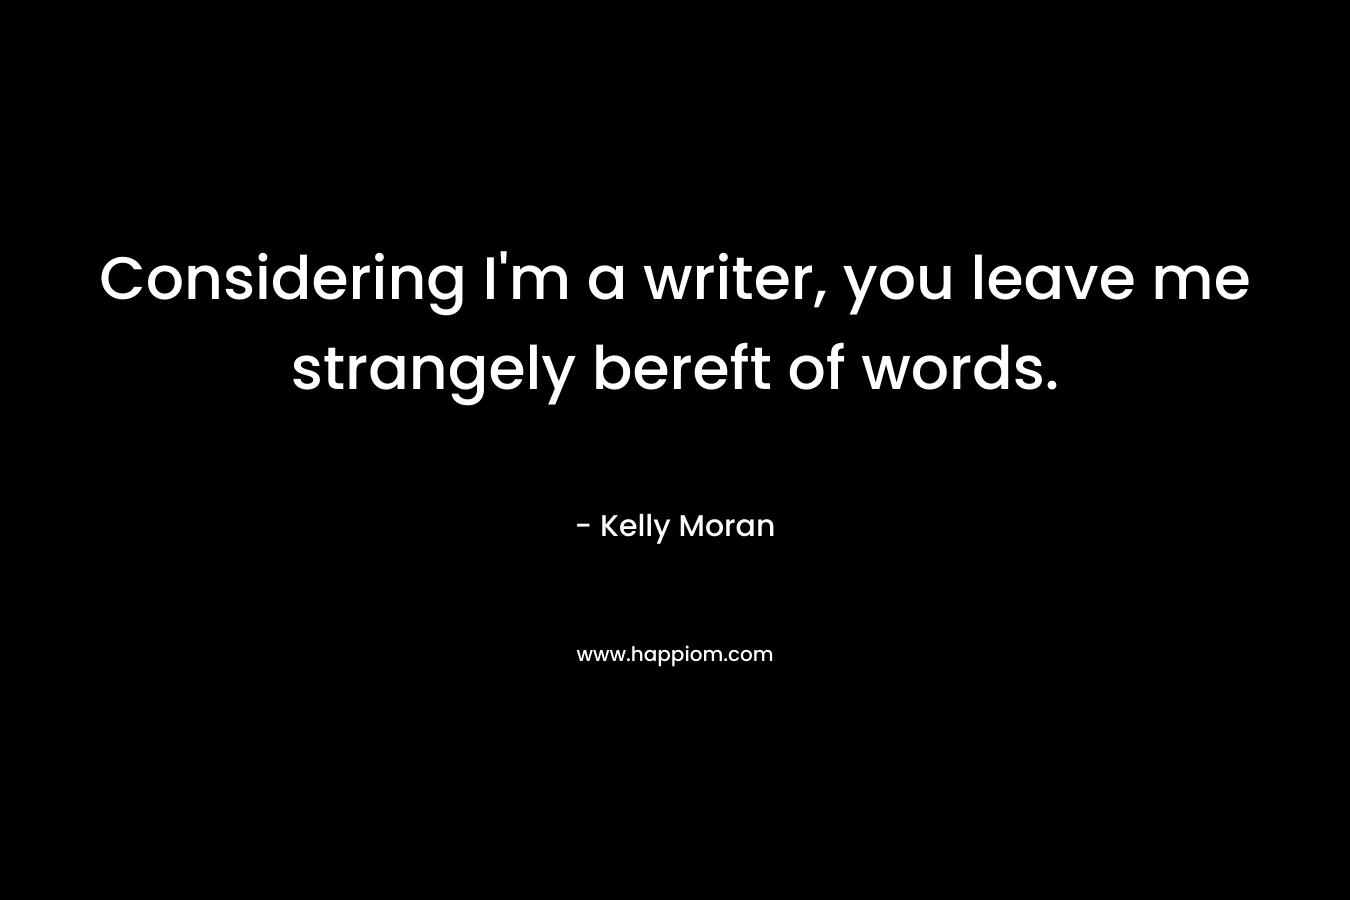 Considering I'm a writer, you leave me strangely bereft of words.